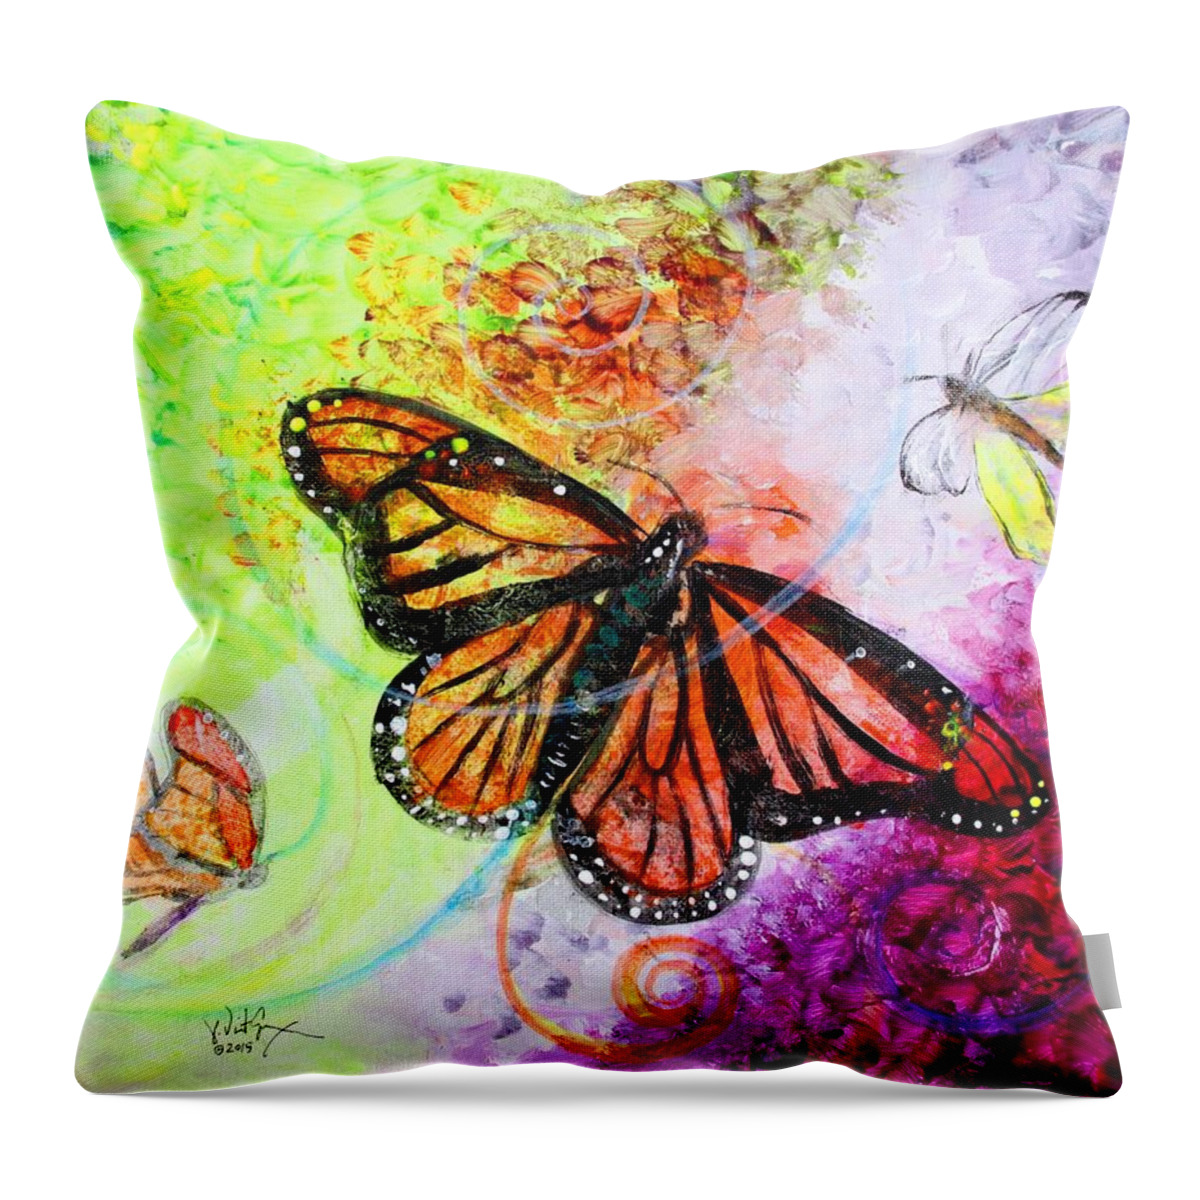 Butterfly Throw Pillow featuring the painting Sincere Beauty by J Vincent Scarpace